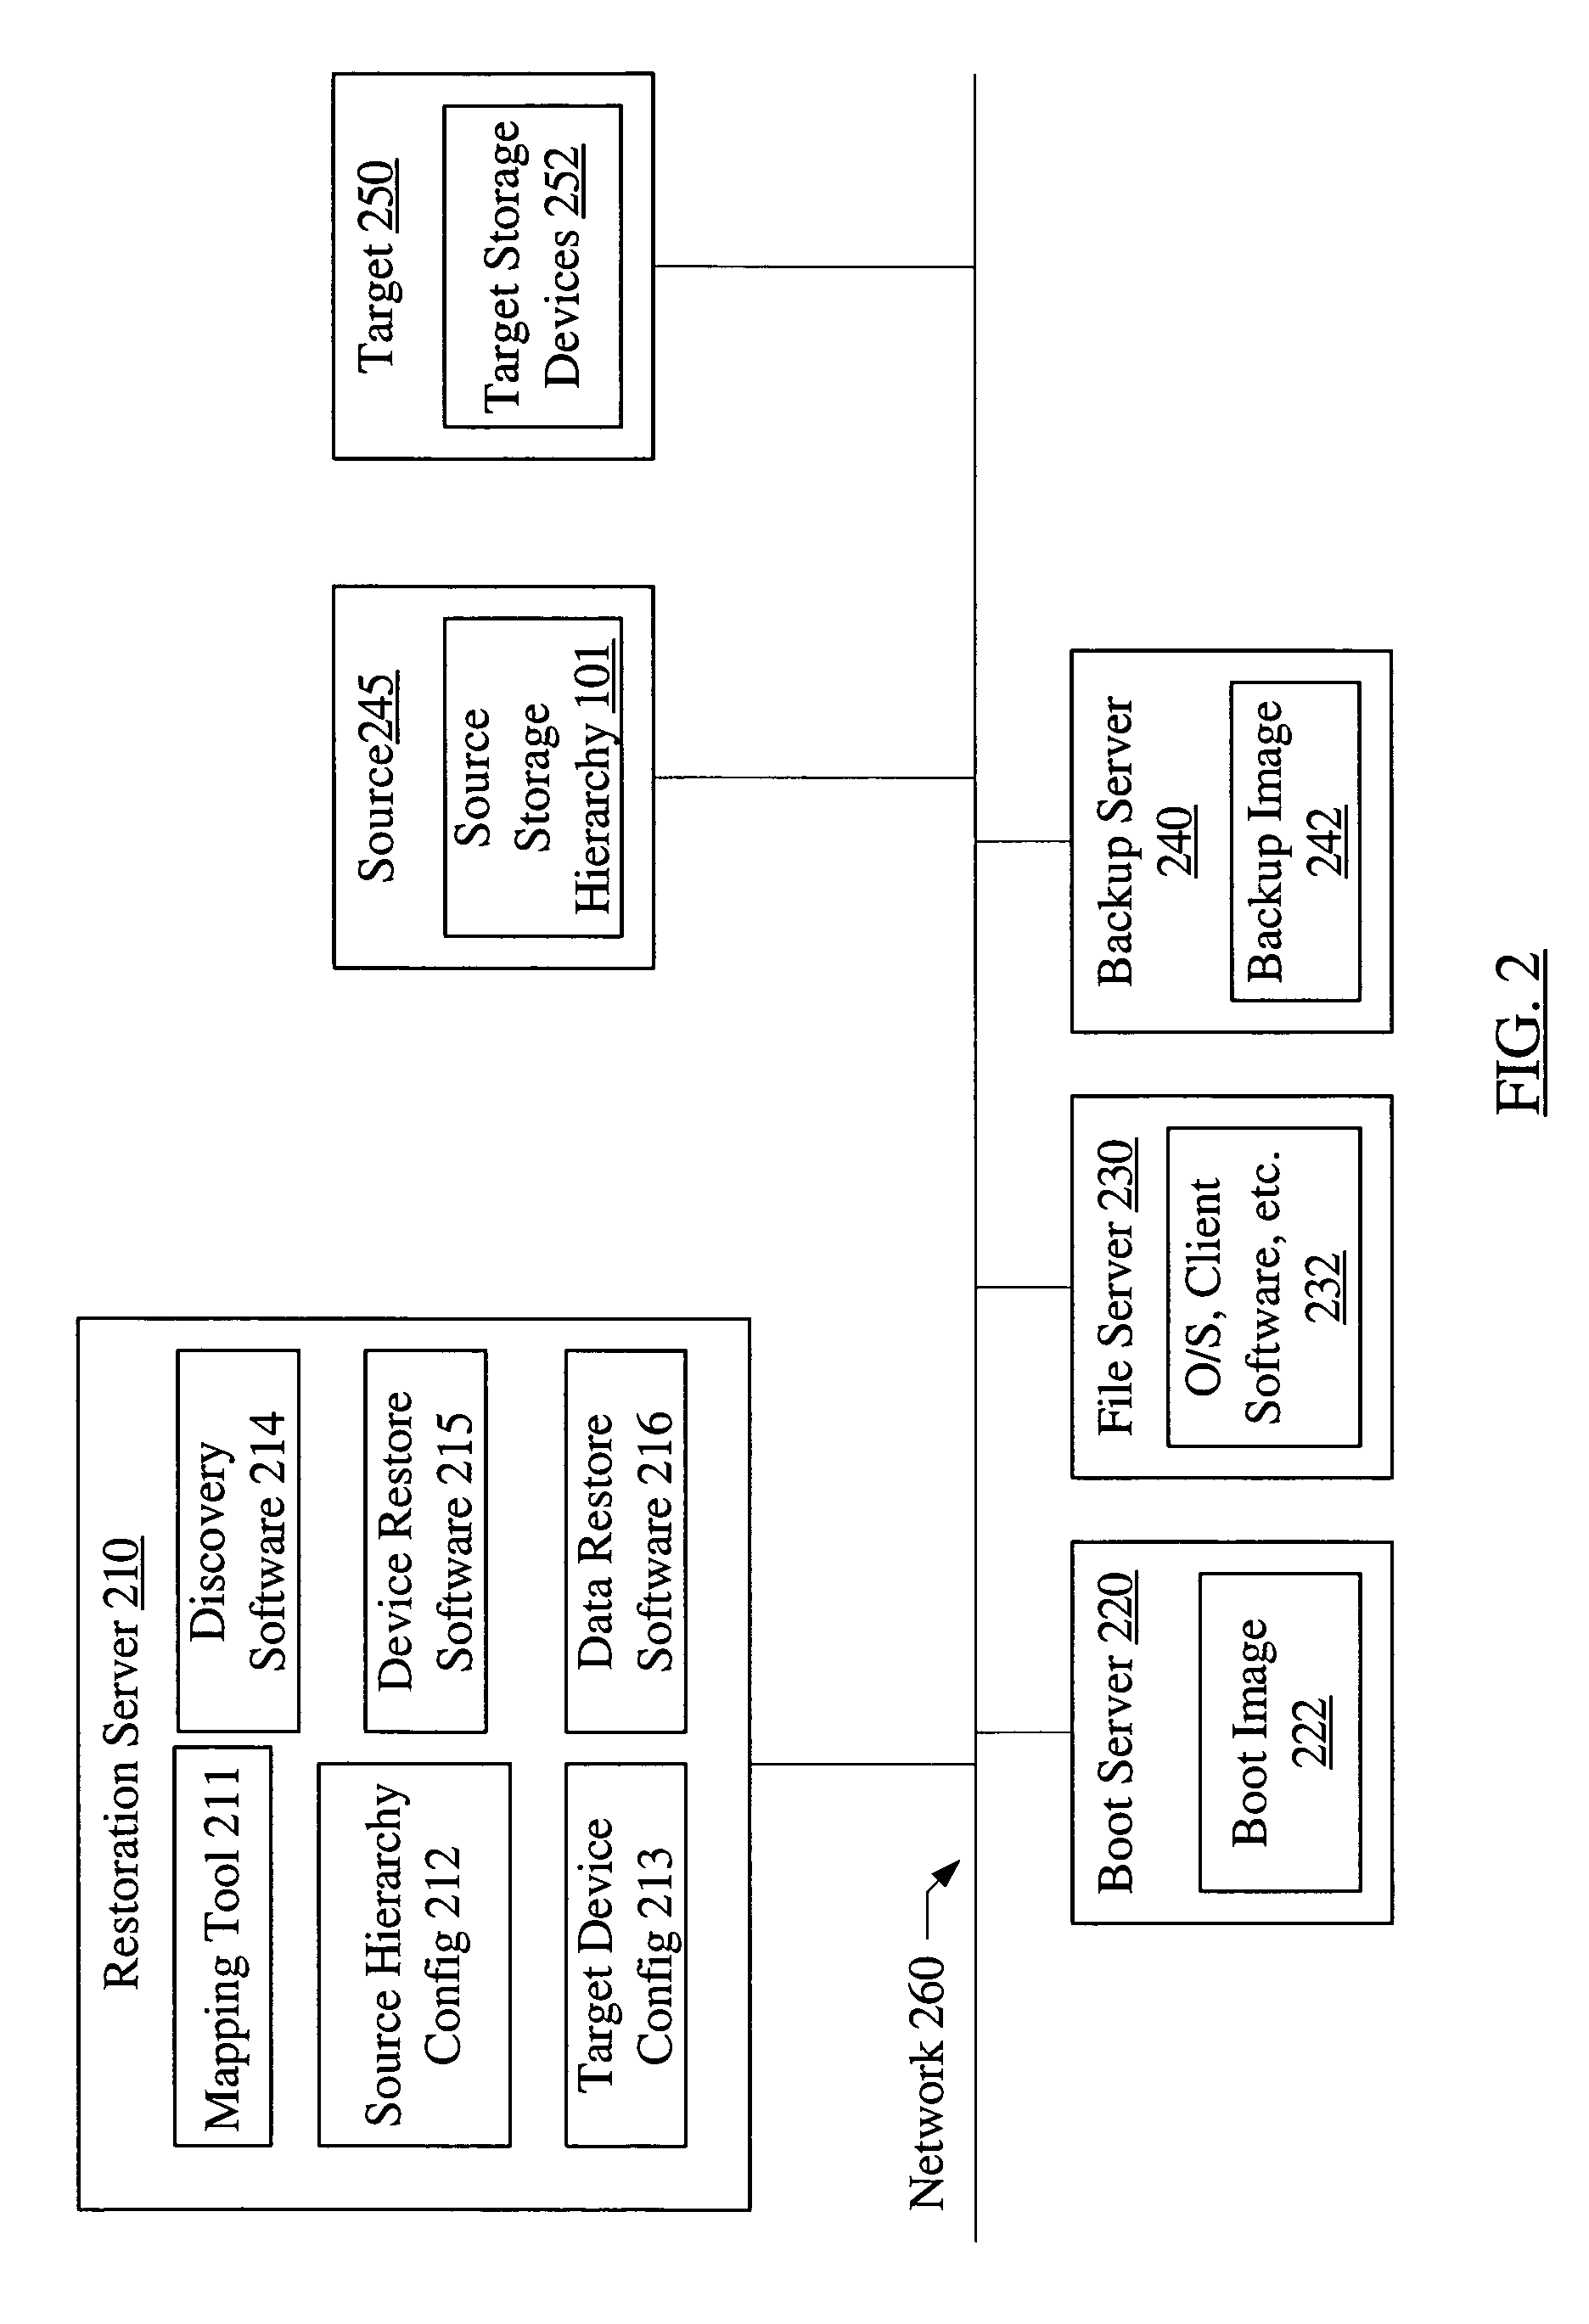 System and method for hierarchical storage mapping